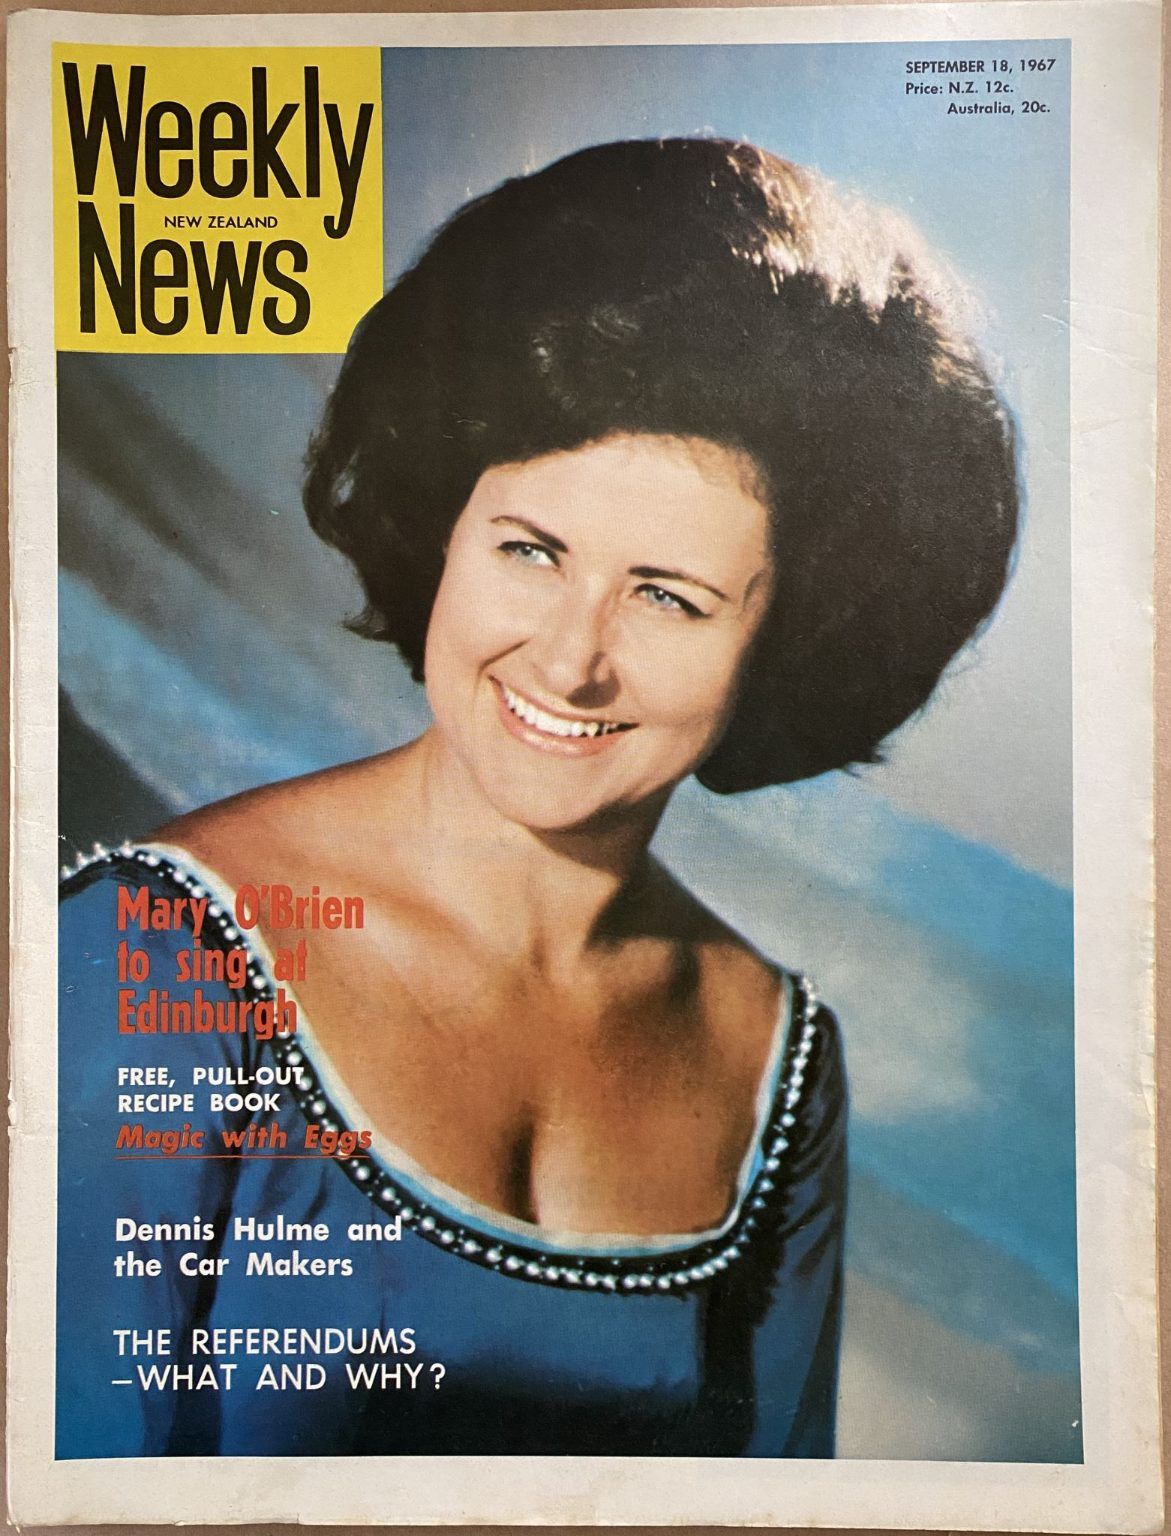 OLD NEWSPAPER: New Zealand Weekly News, No. 5416, 18 September 1967